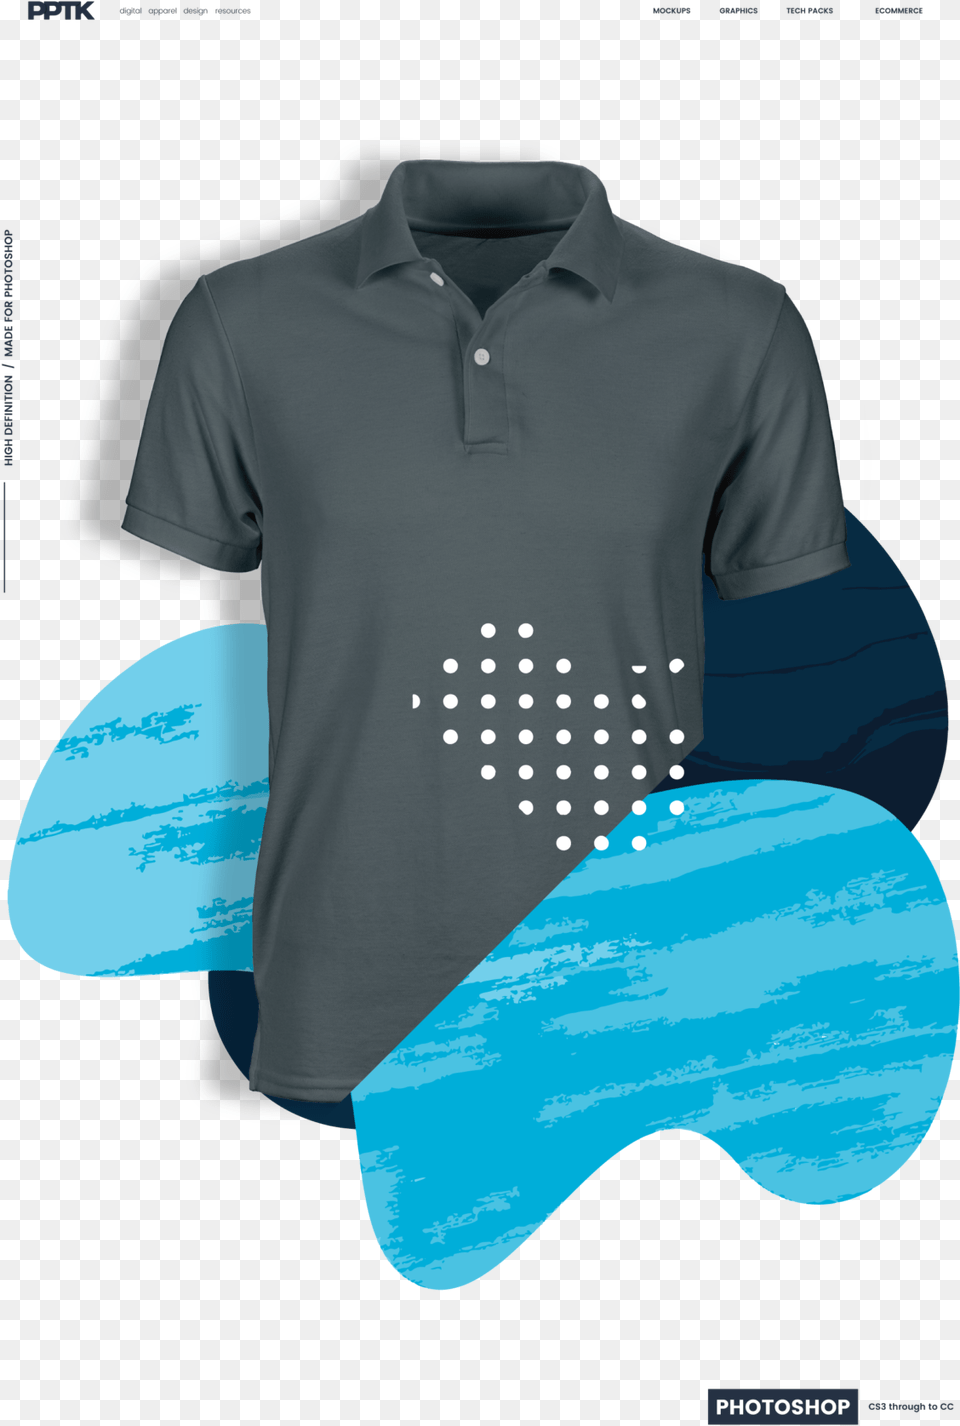 Ghosted Mens Polo Shirt Template Photoshop Hero Mockup T Shirt Polo, Clothing, T-shirt, Sleeve, Long Sleeve Png